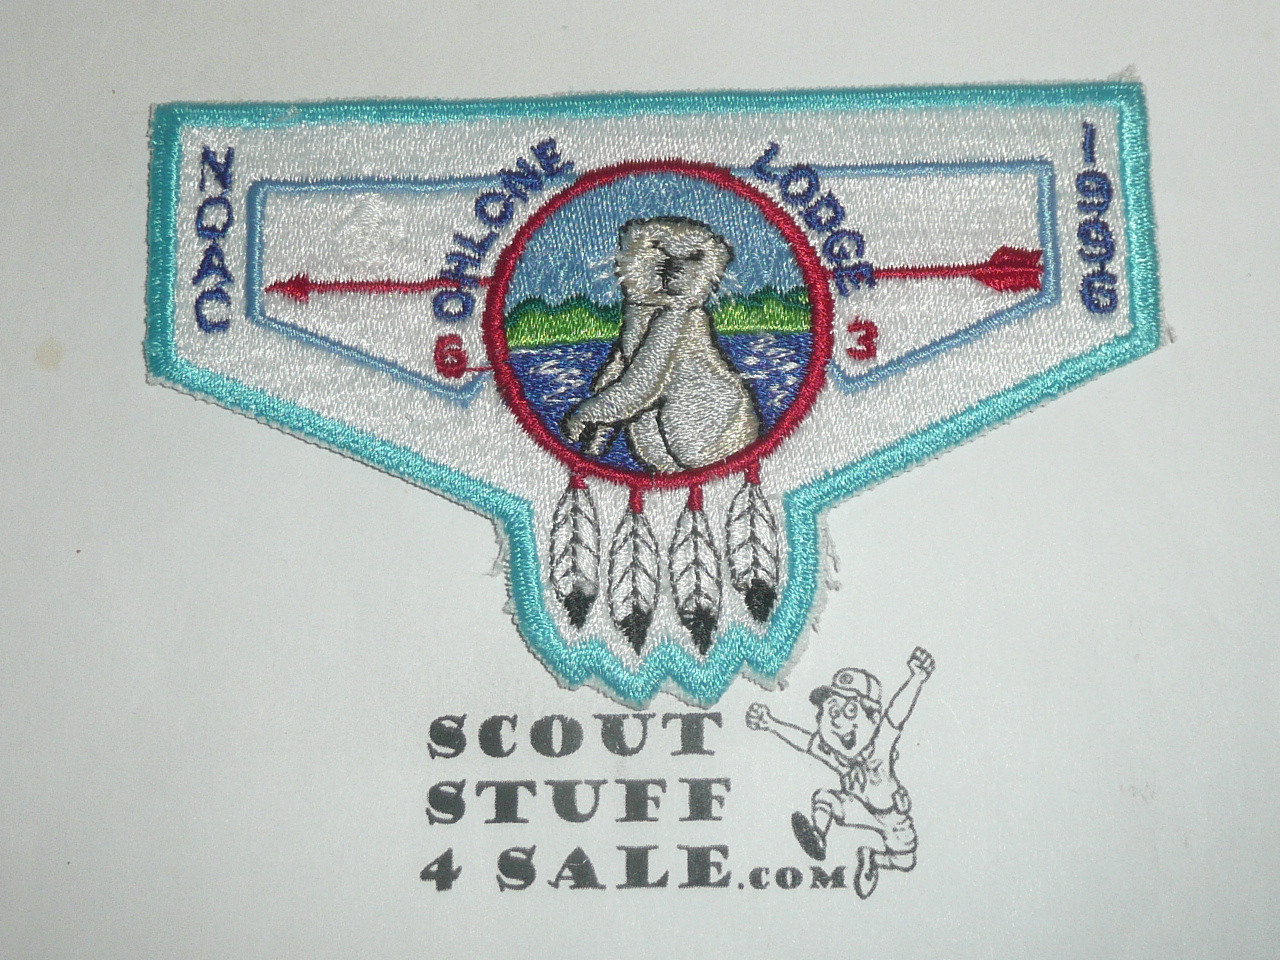 Order of the Arrow Lodge #63 Ohlone s4 1996 NOAC Flap Patch